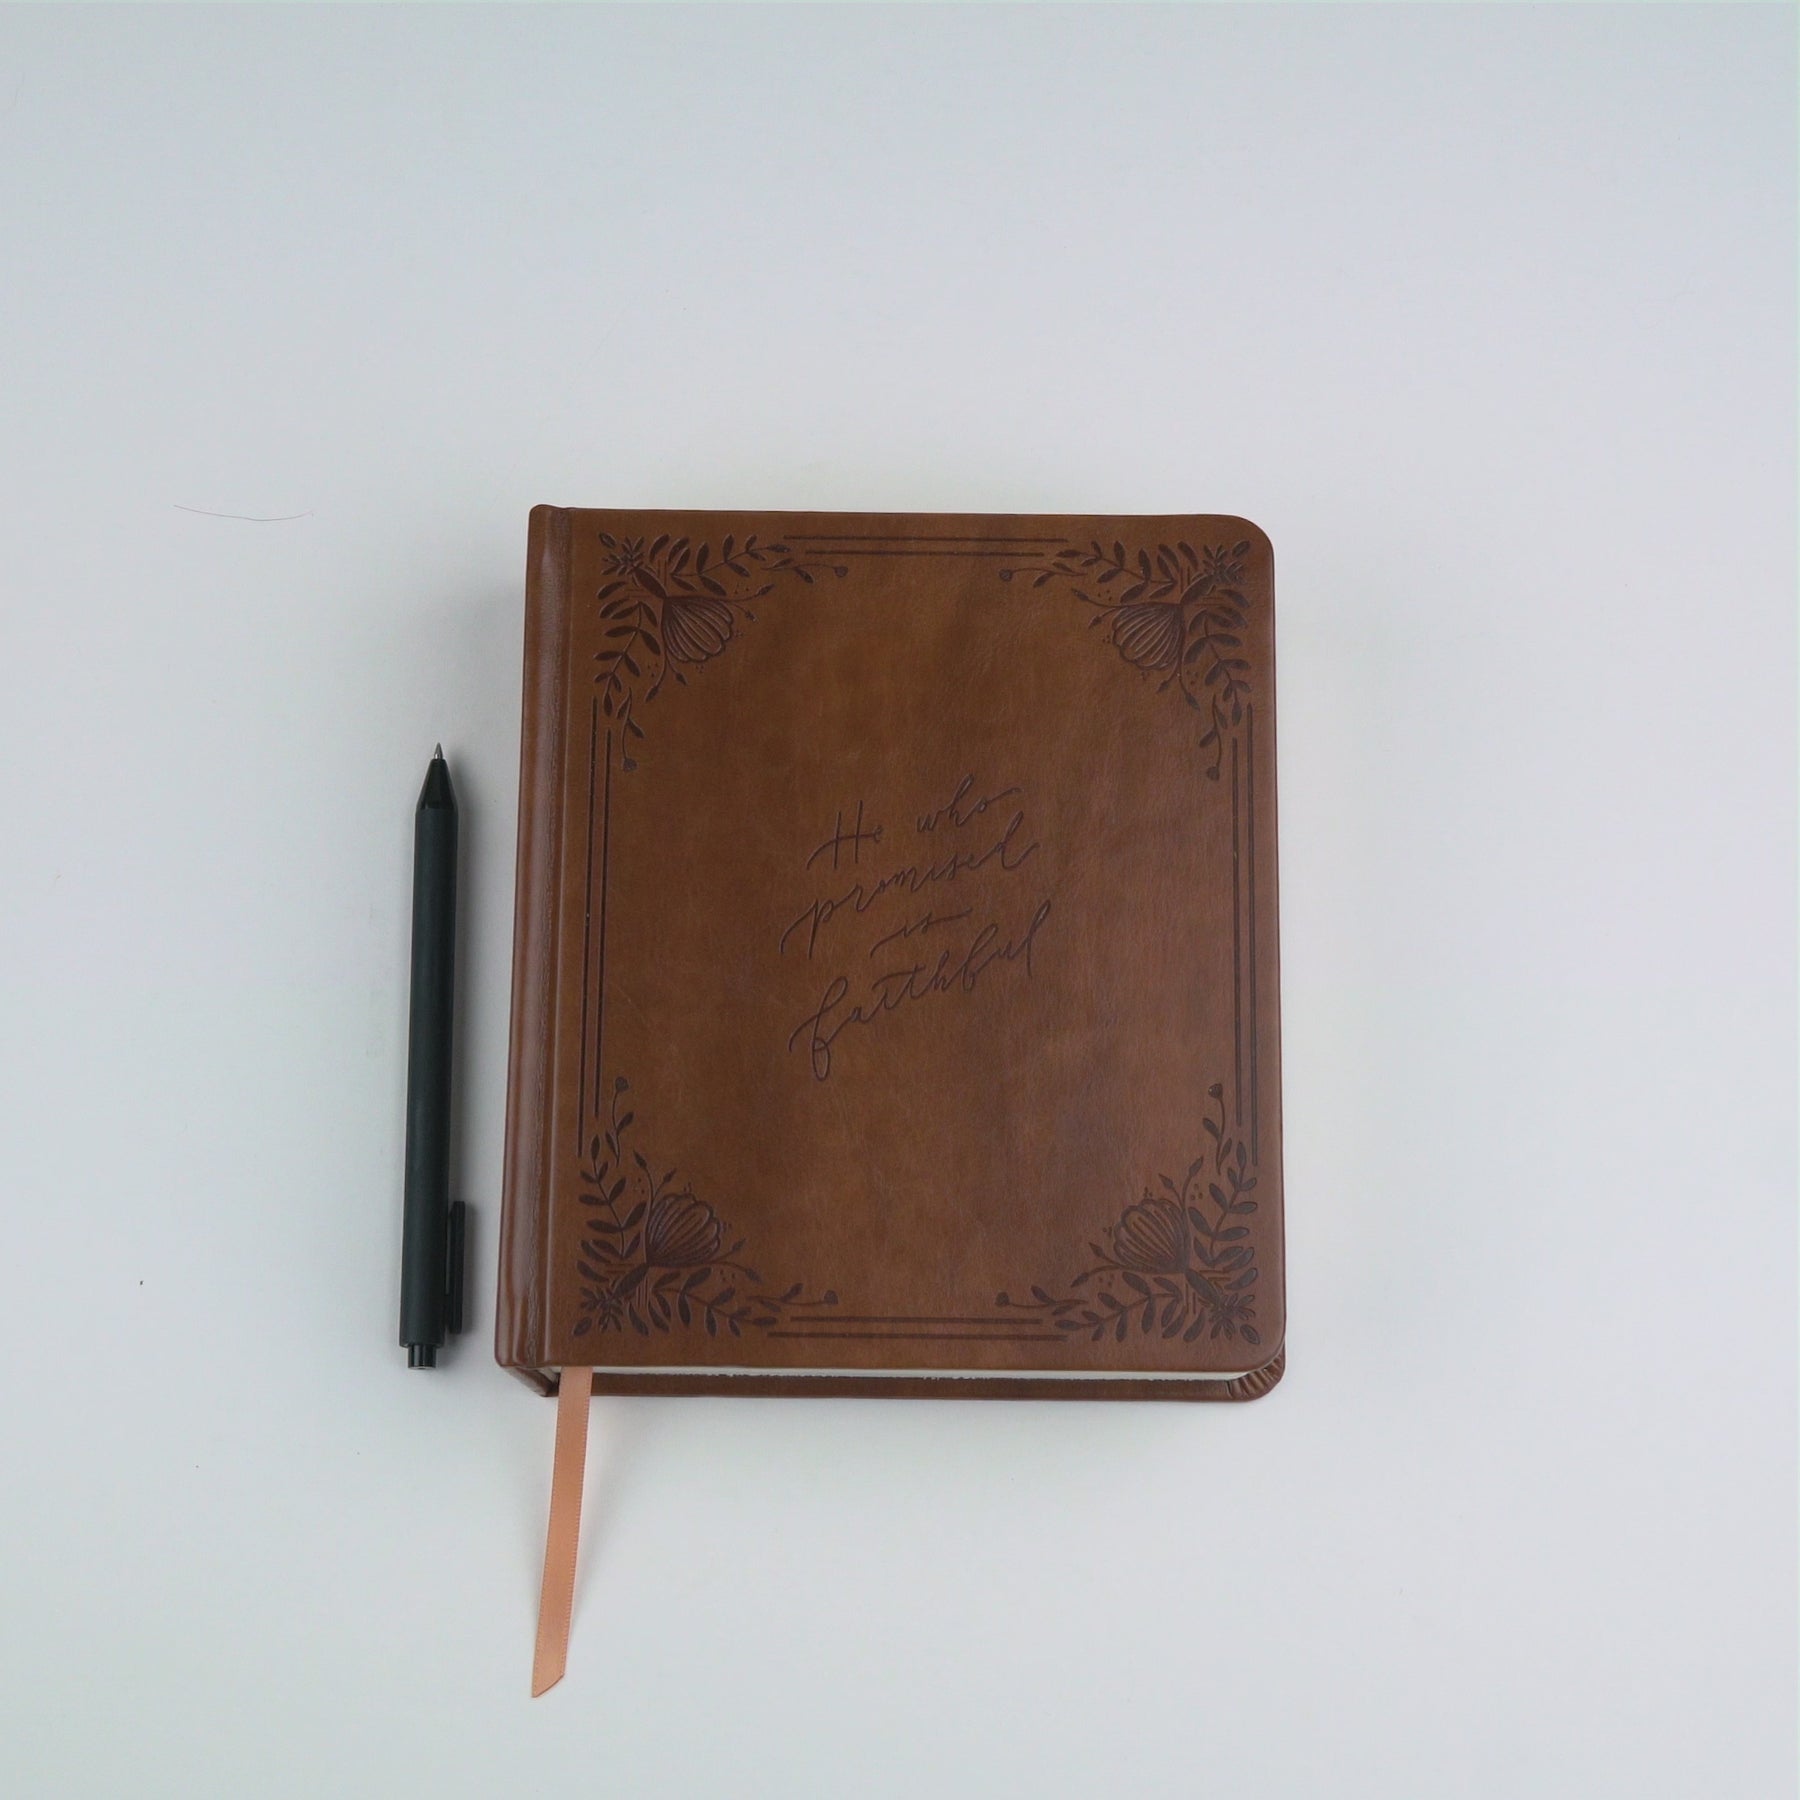 Explore the Perfect Prayer Journal for by Harrison, JB